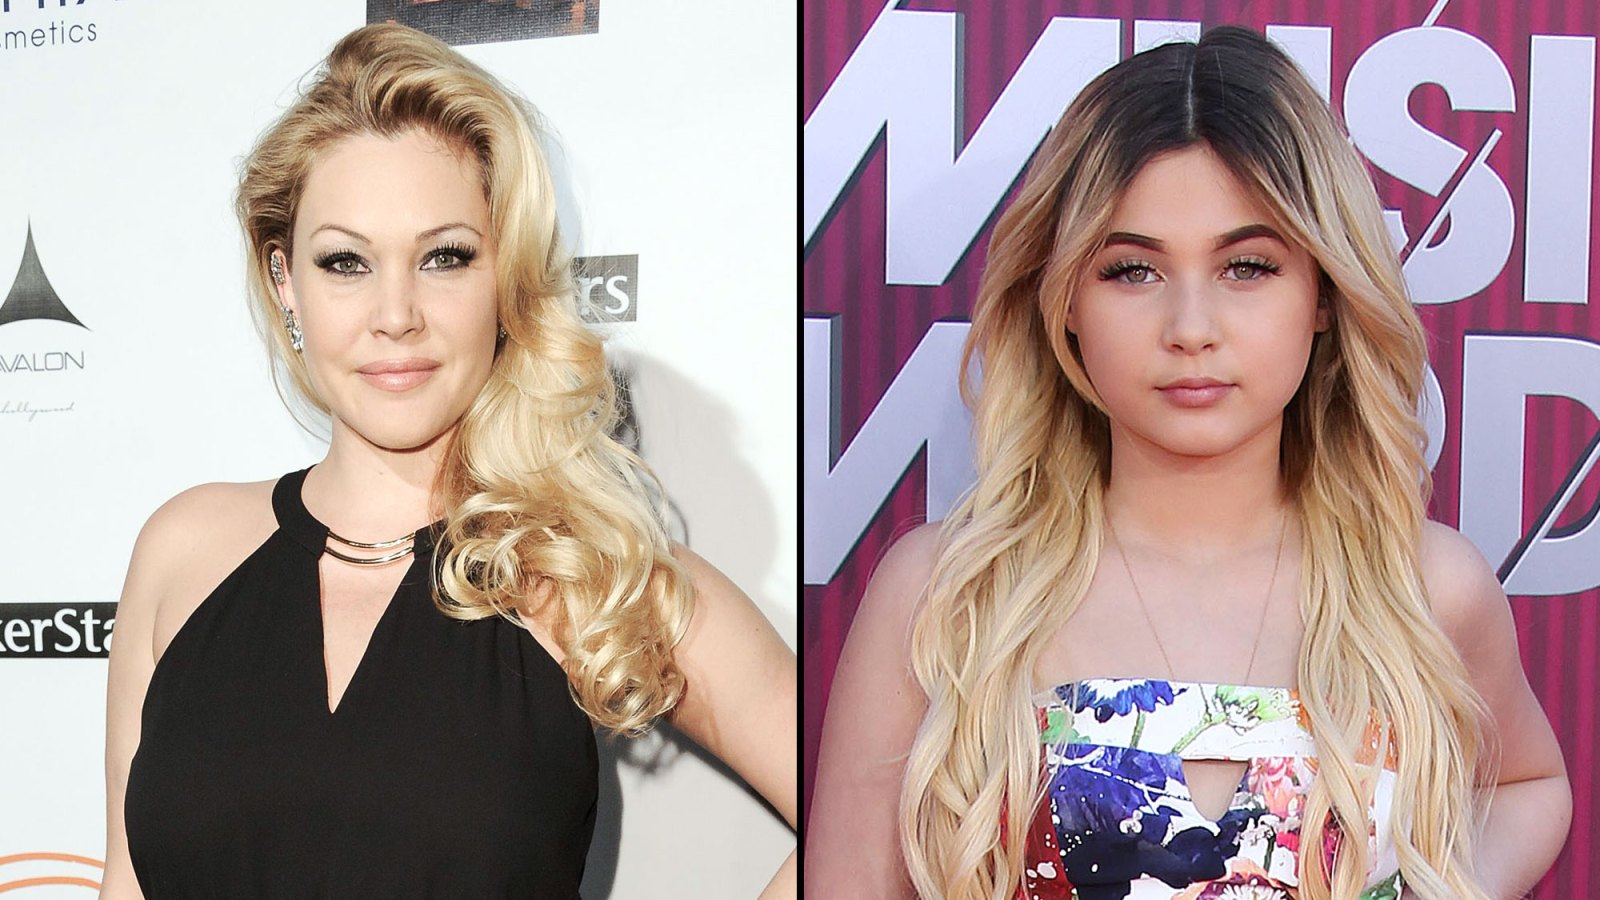 Shanna Moakler's Daughter Alabama Is Helping Her Find a Boyfriend Setting Her up on Dating Apps